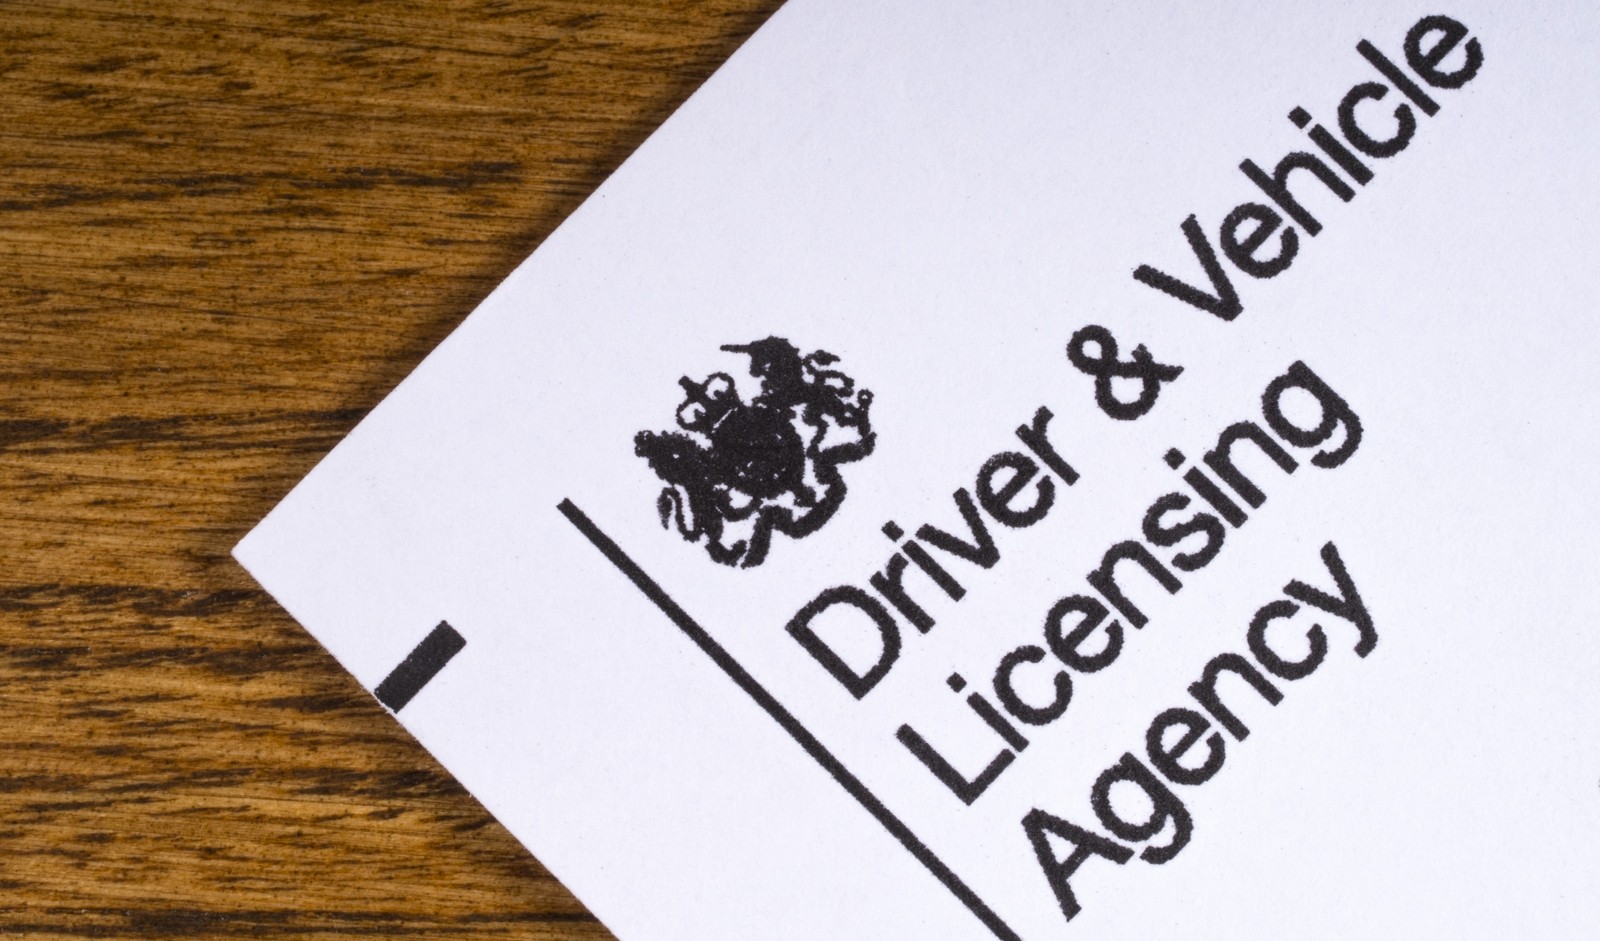 Driver and Vehicle Licensing Agency